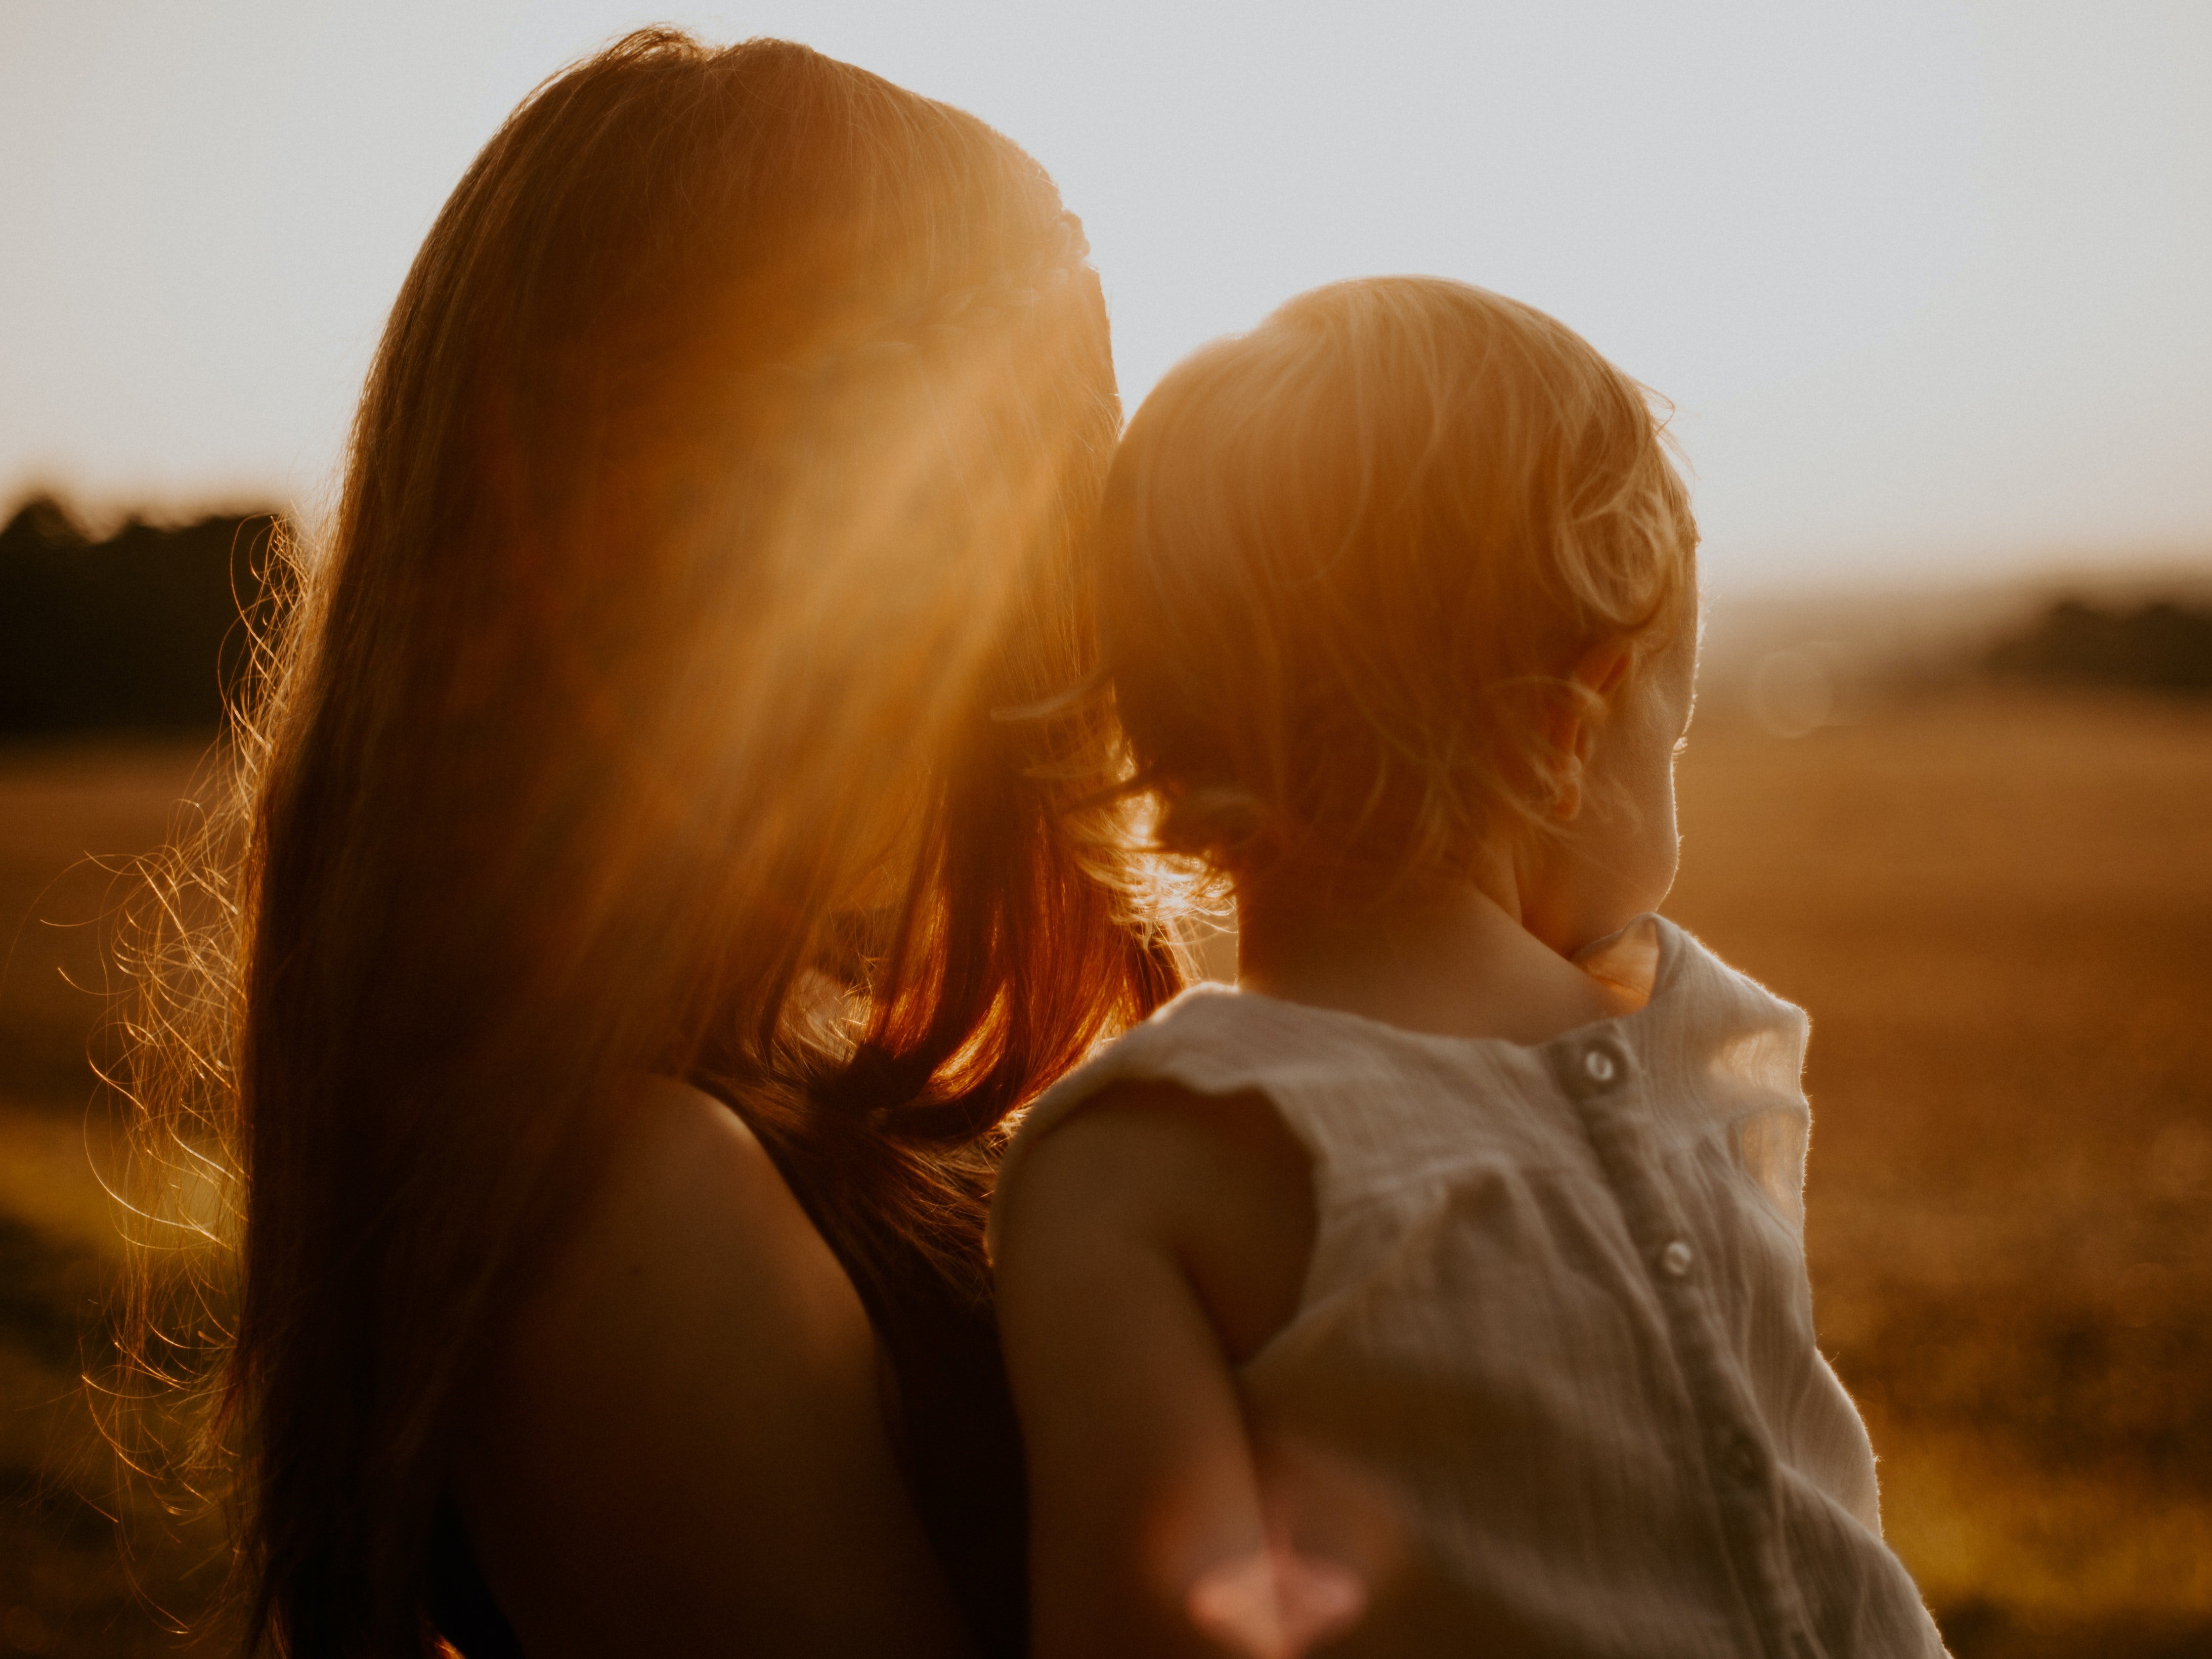 Eliza adored her daughter, Mary. | Source: Unsplash